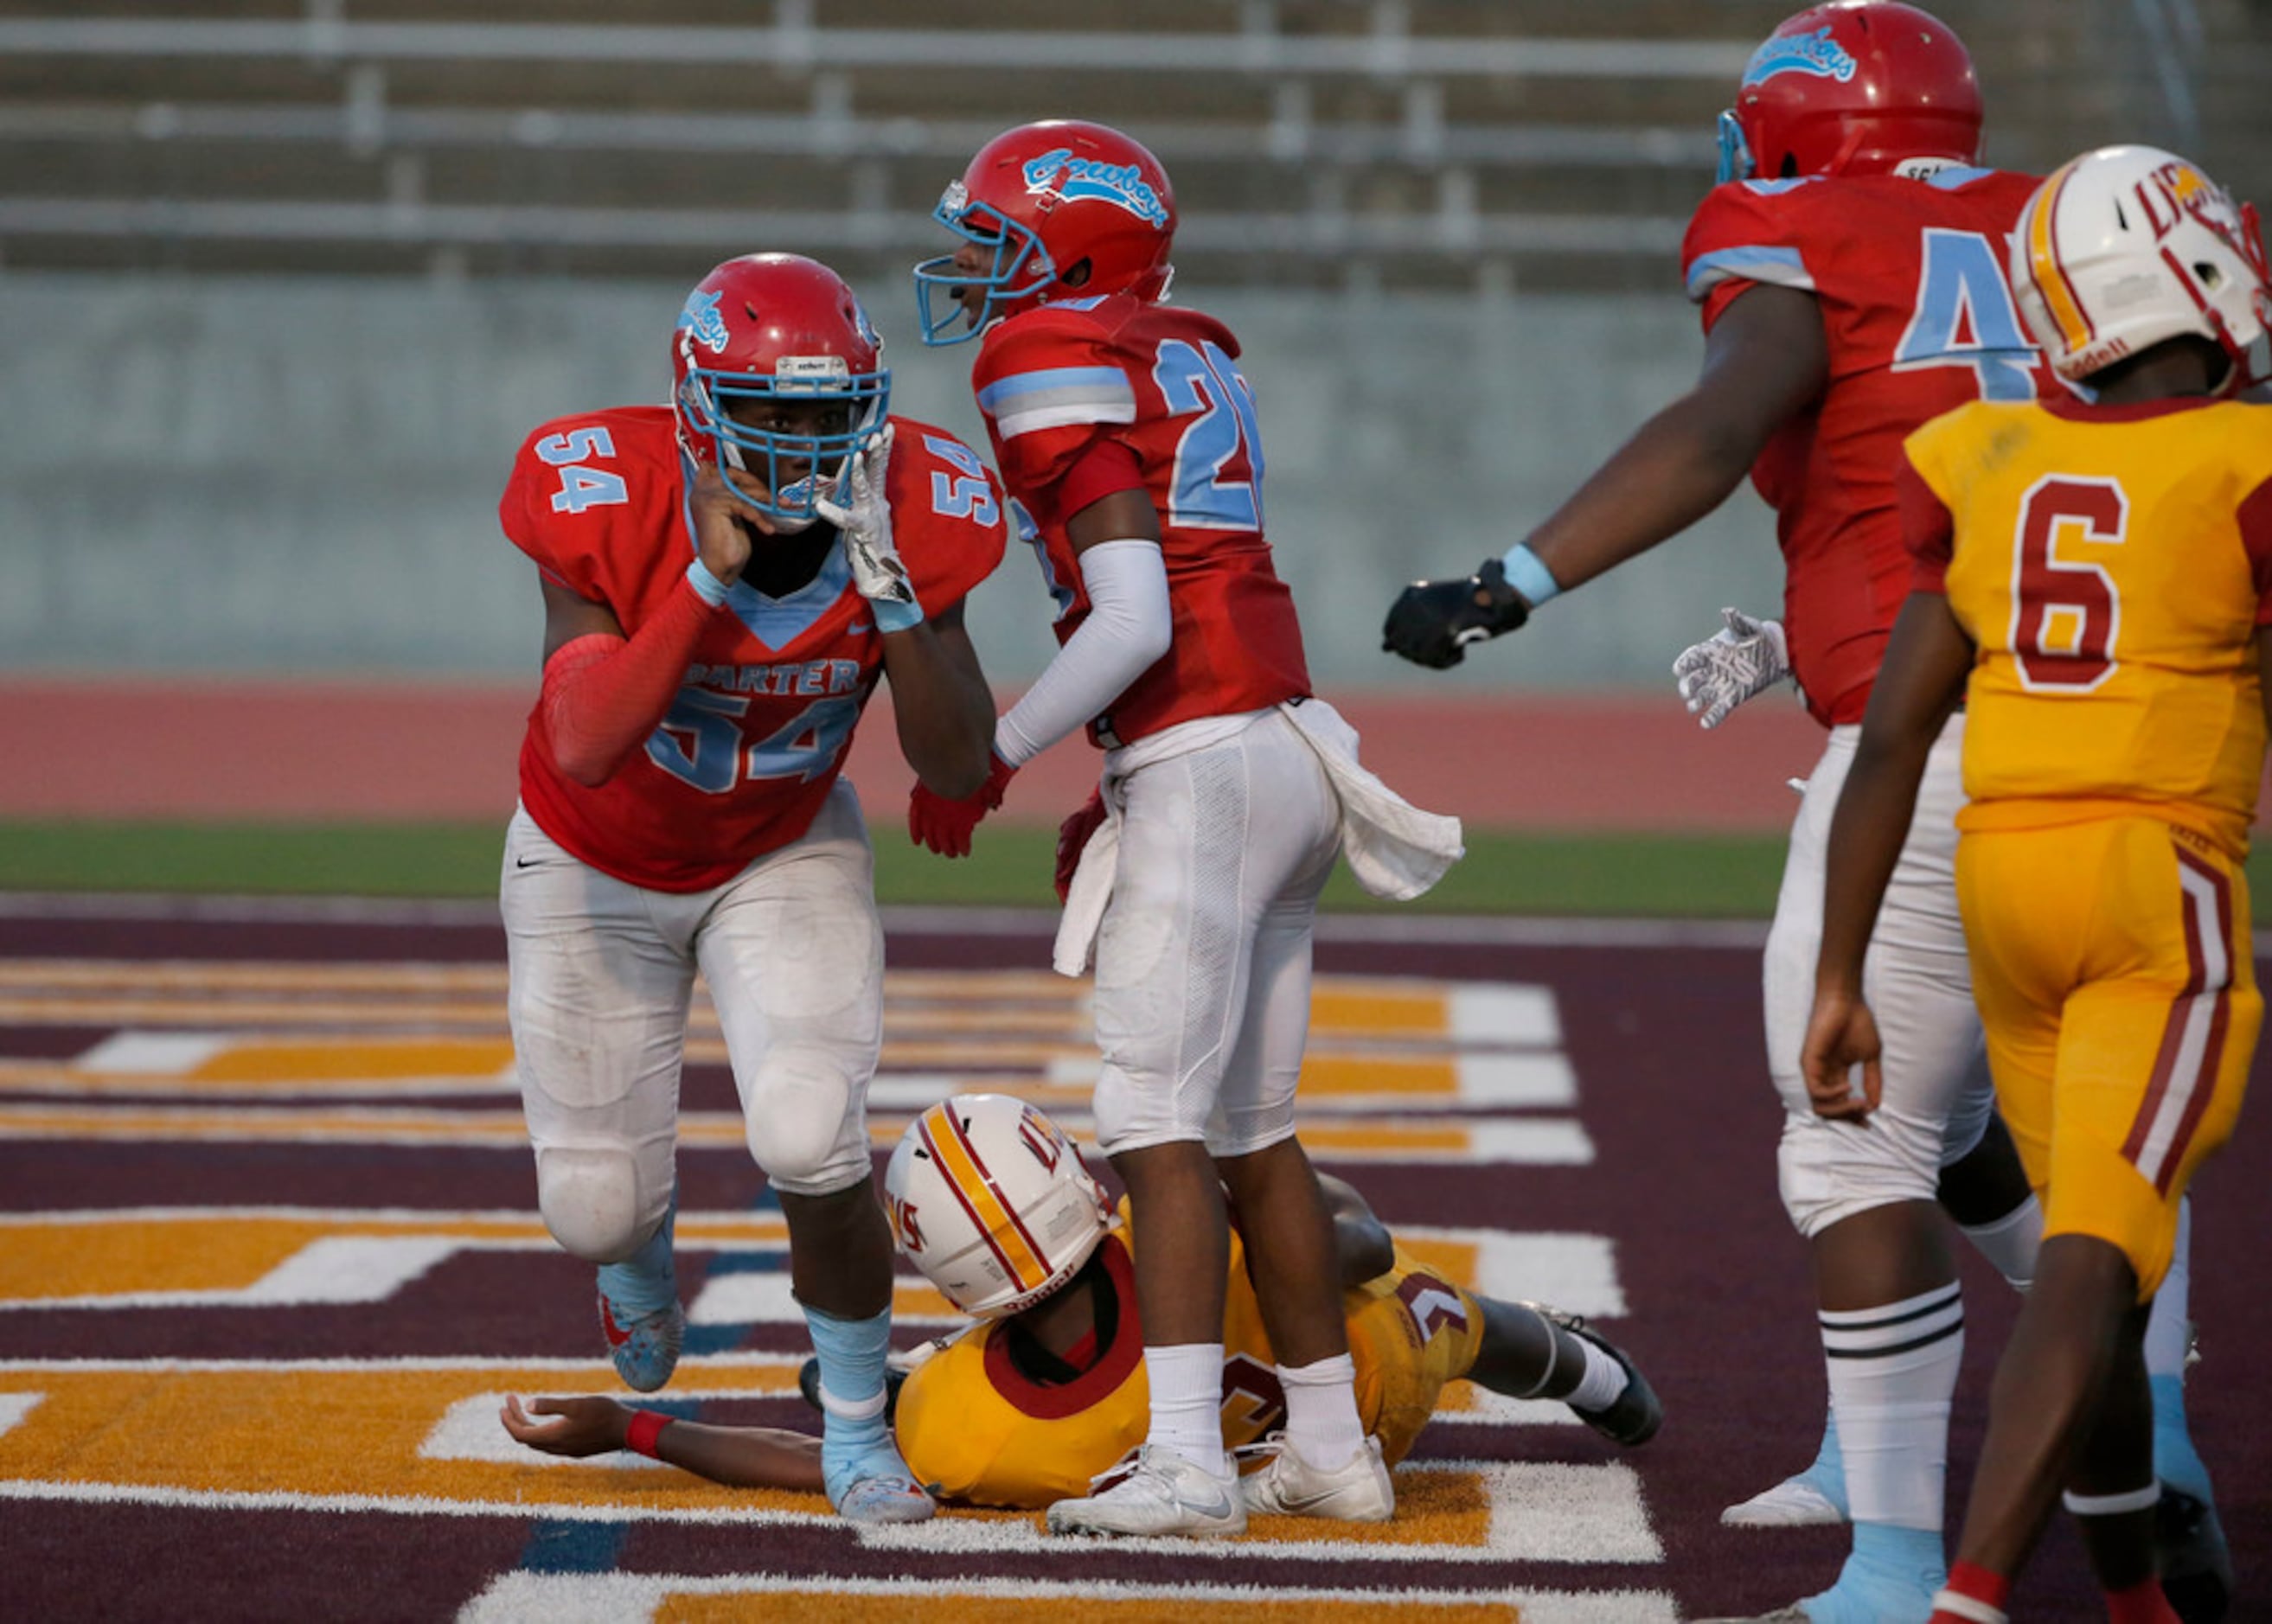 Dallas Carter players Randy Anthony (54) and Jv'Quavion Vinson (20) celebrate their safety...